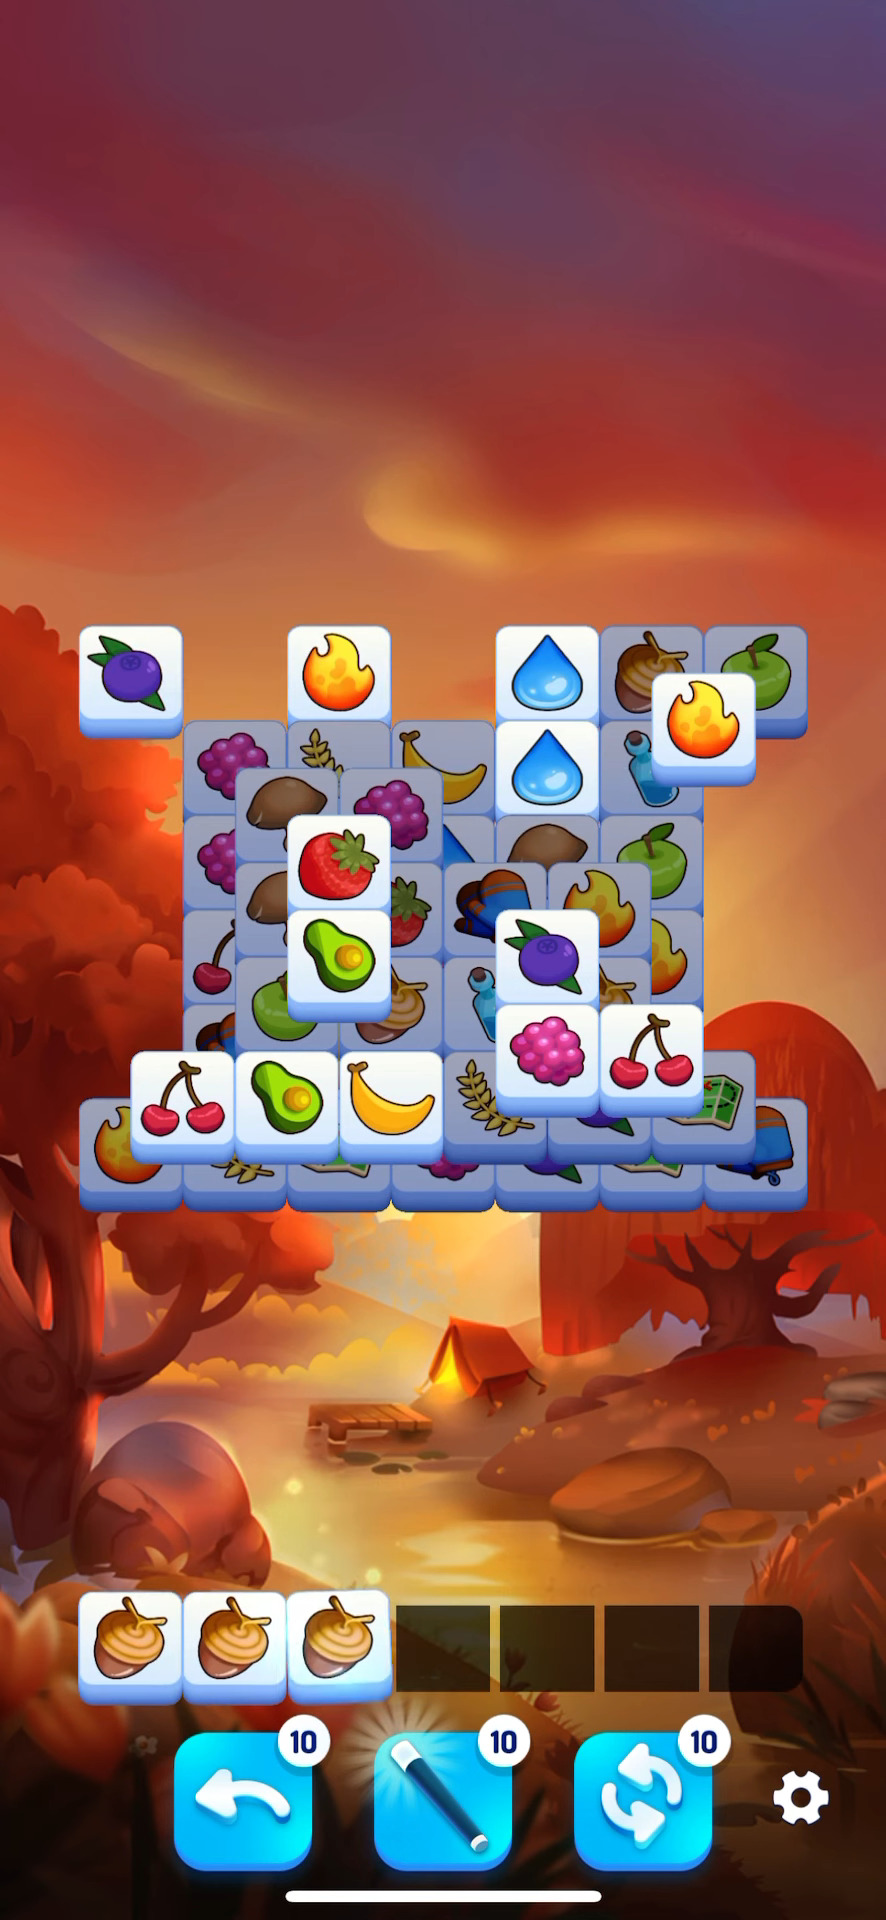 Gameplay of the Triple Tile: Match Puzzle Game for Android phone or tablet.